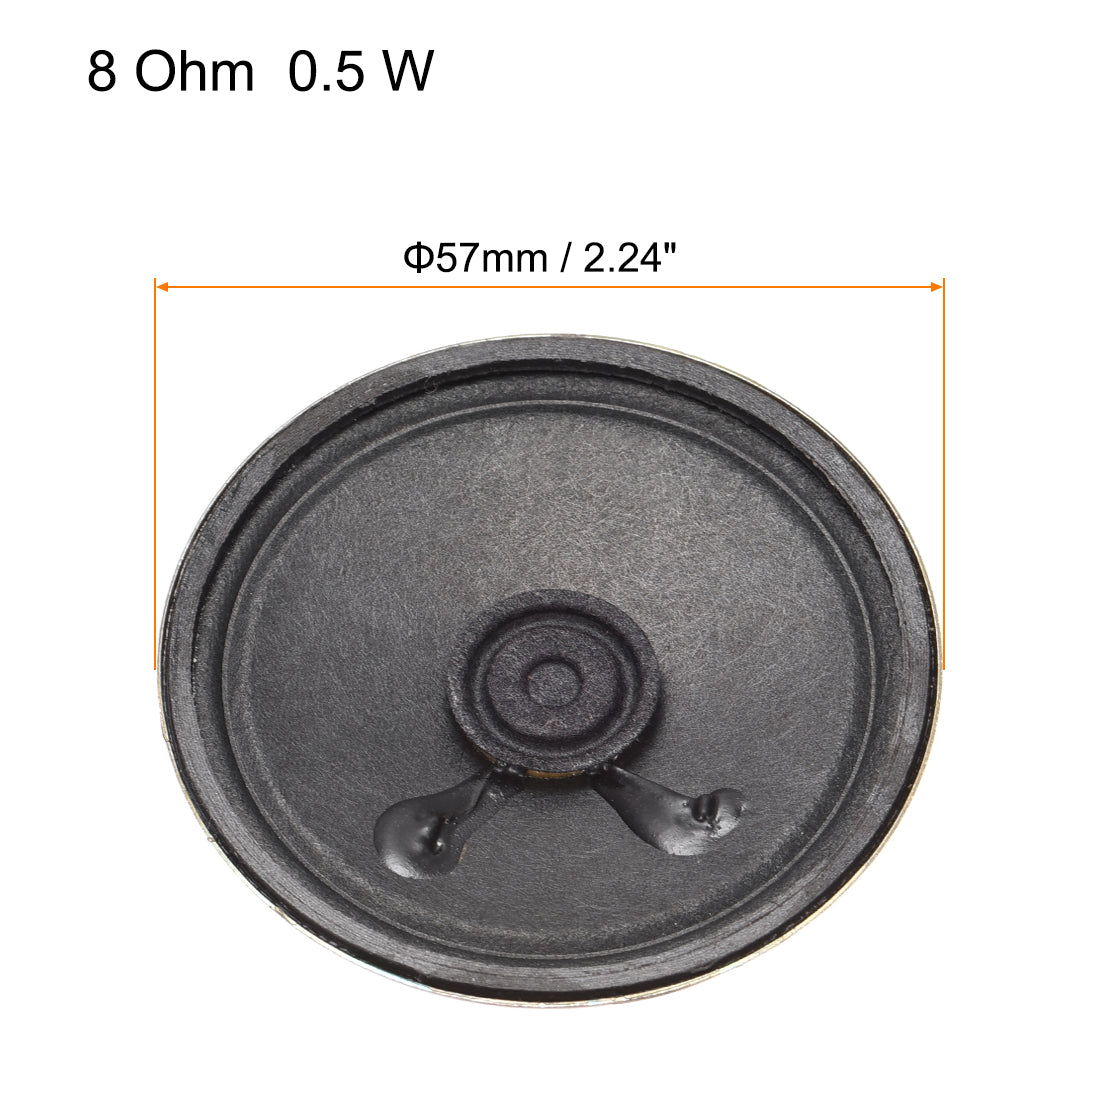 uxcell Uxcell 0.5W 8 Ohm DIY Magnetic Speaker 57mm Round Shape Replacement Loudspeaker for  4pcs